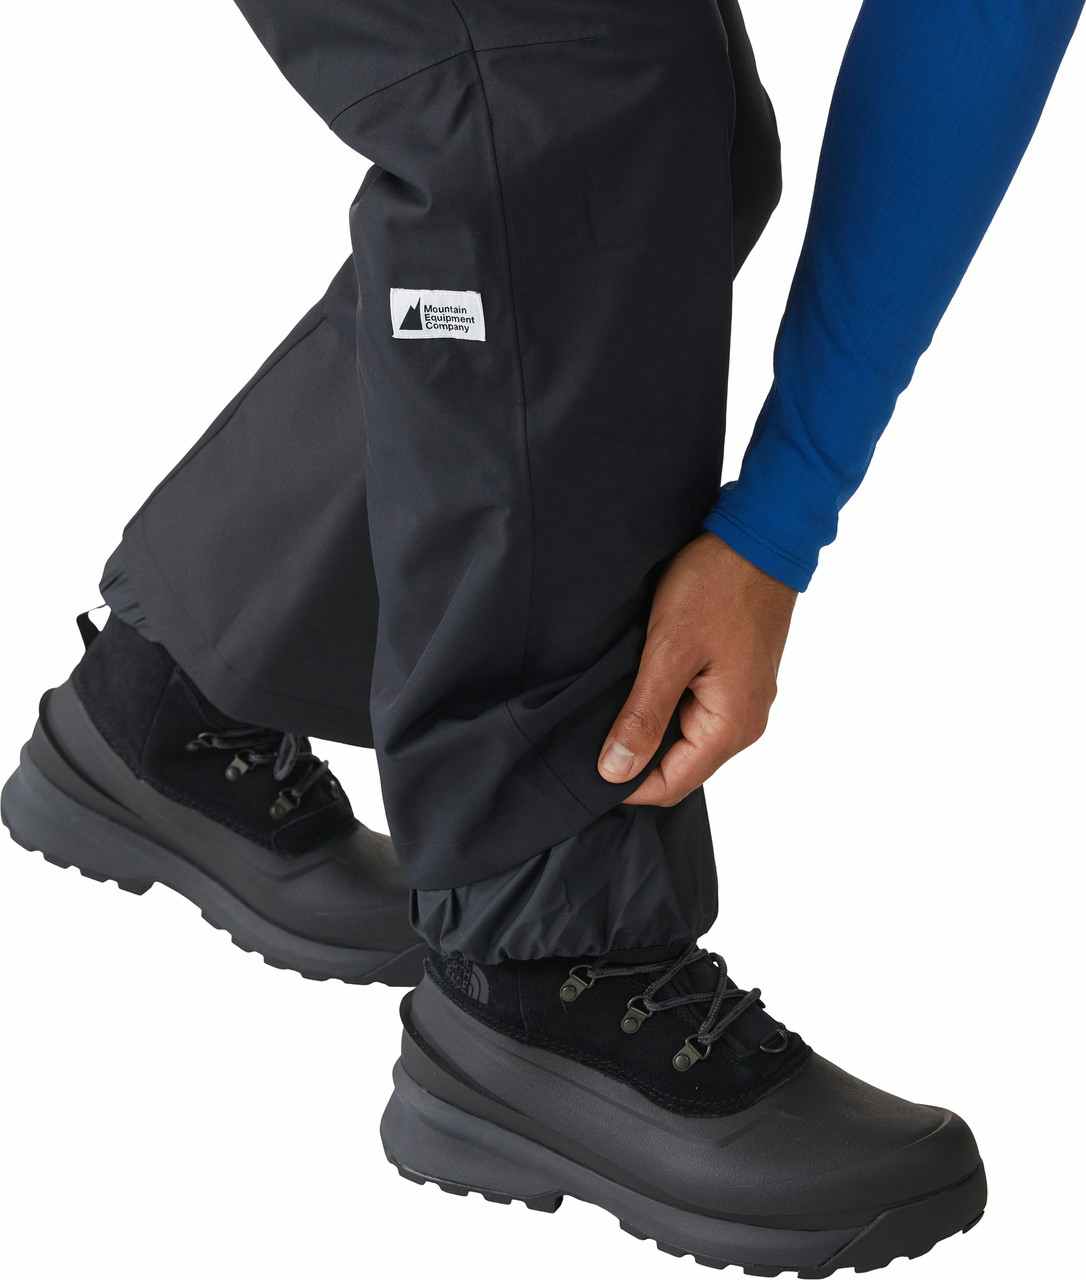 Do It All Insulated Pants Black